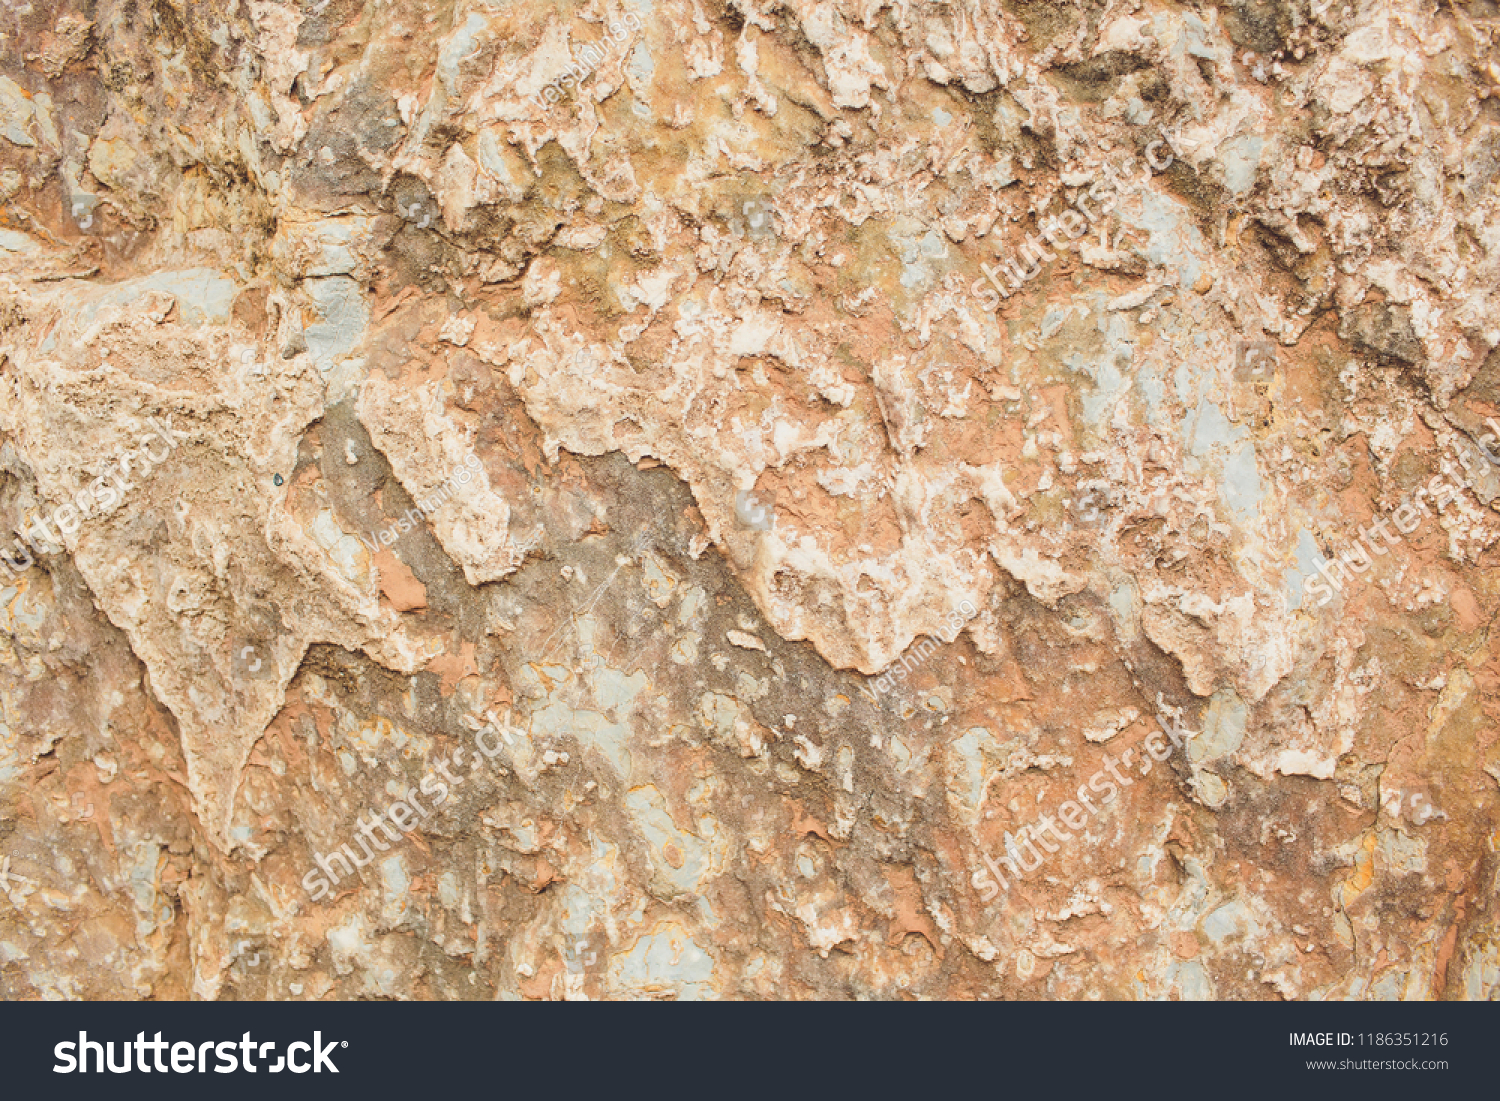 Rock layers - colorful formations of rocks stacked over hundreds of years. Interesting background with fascinating texture. #1186351216